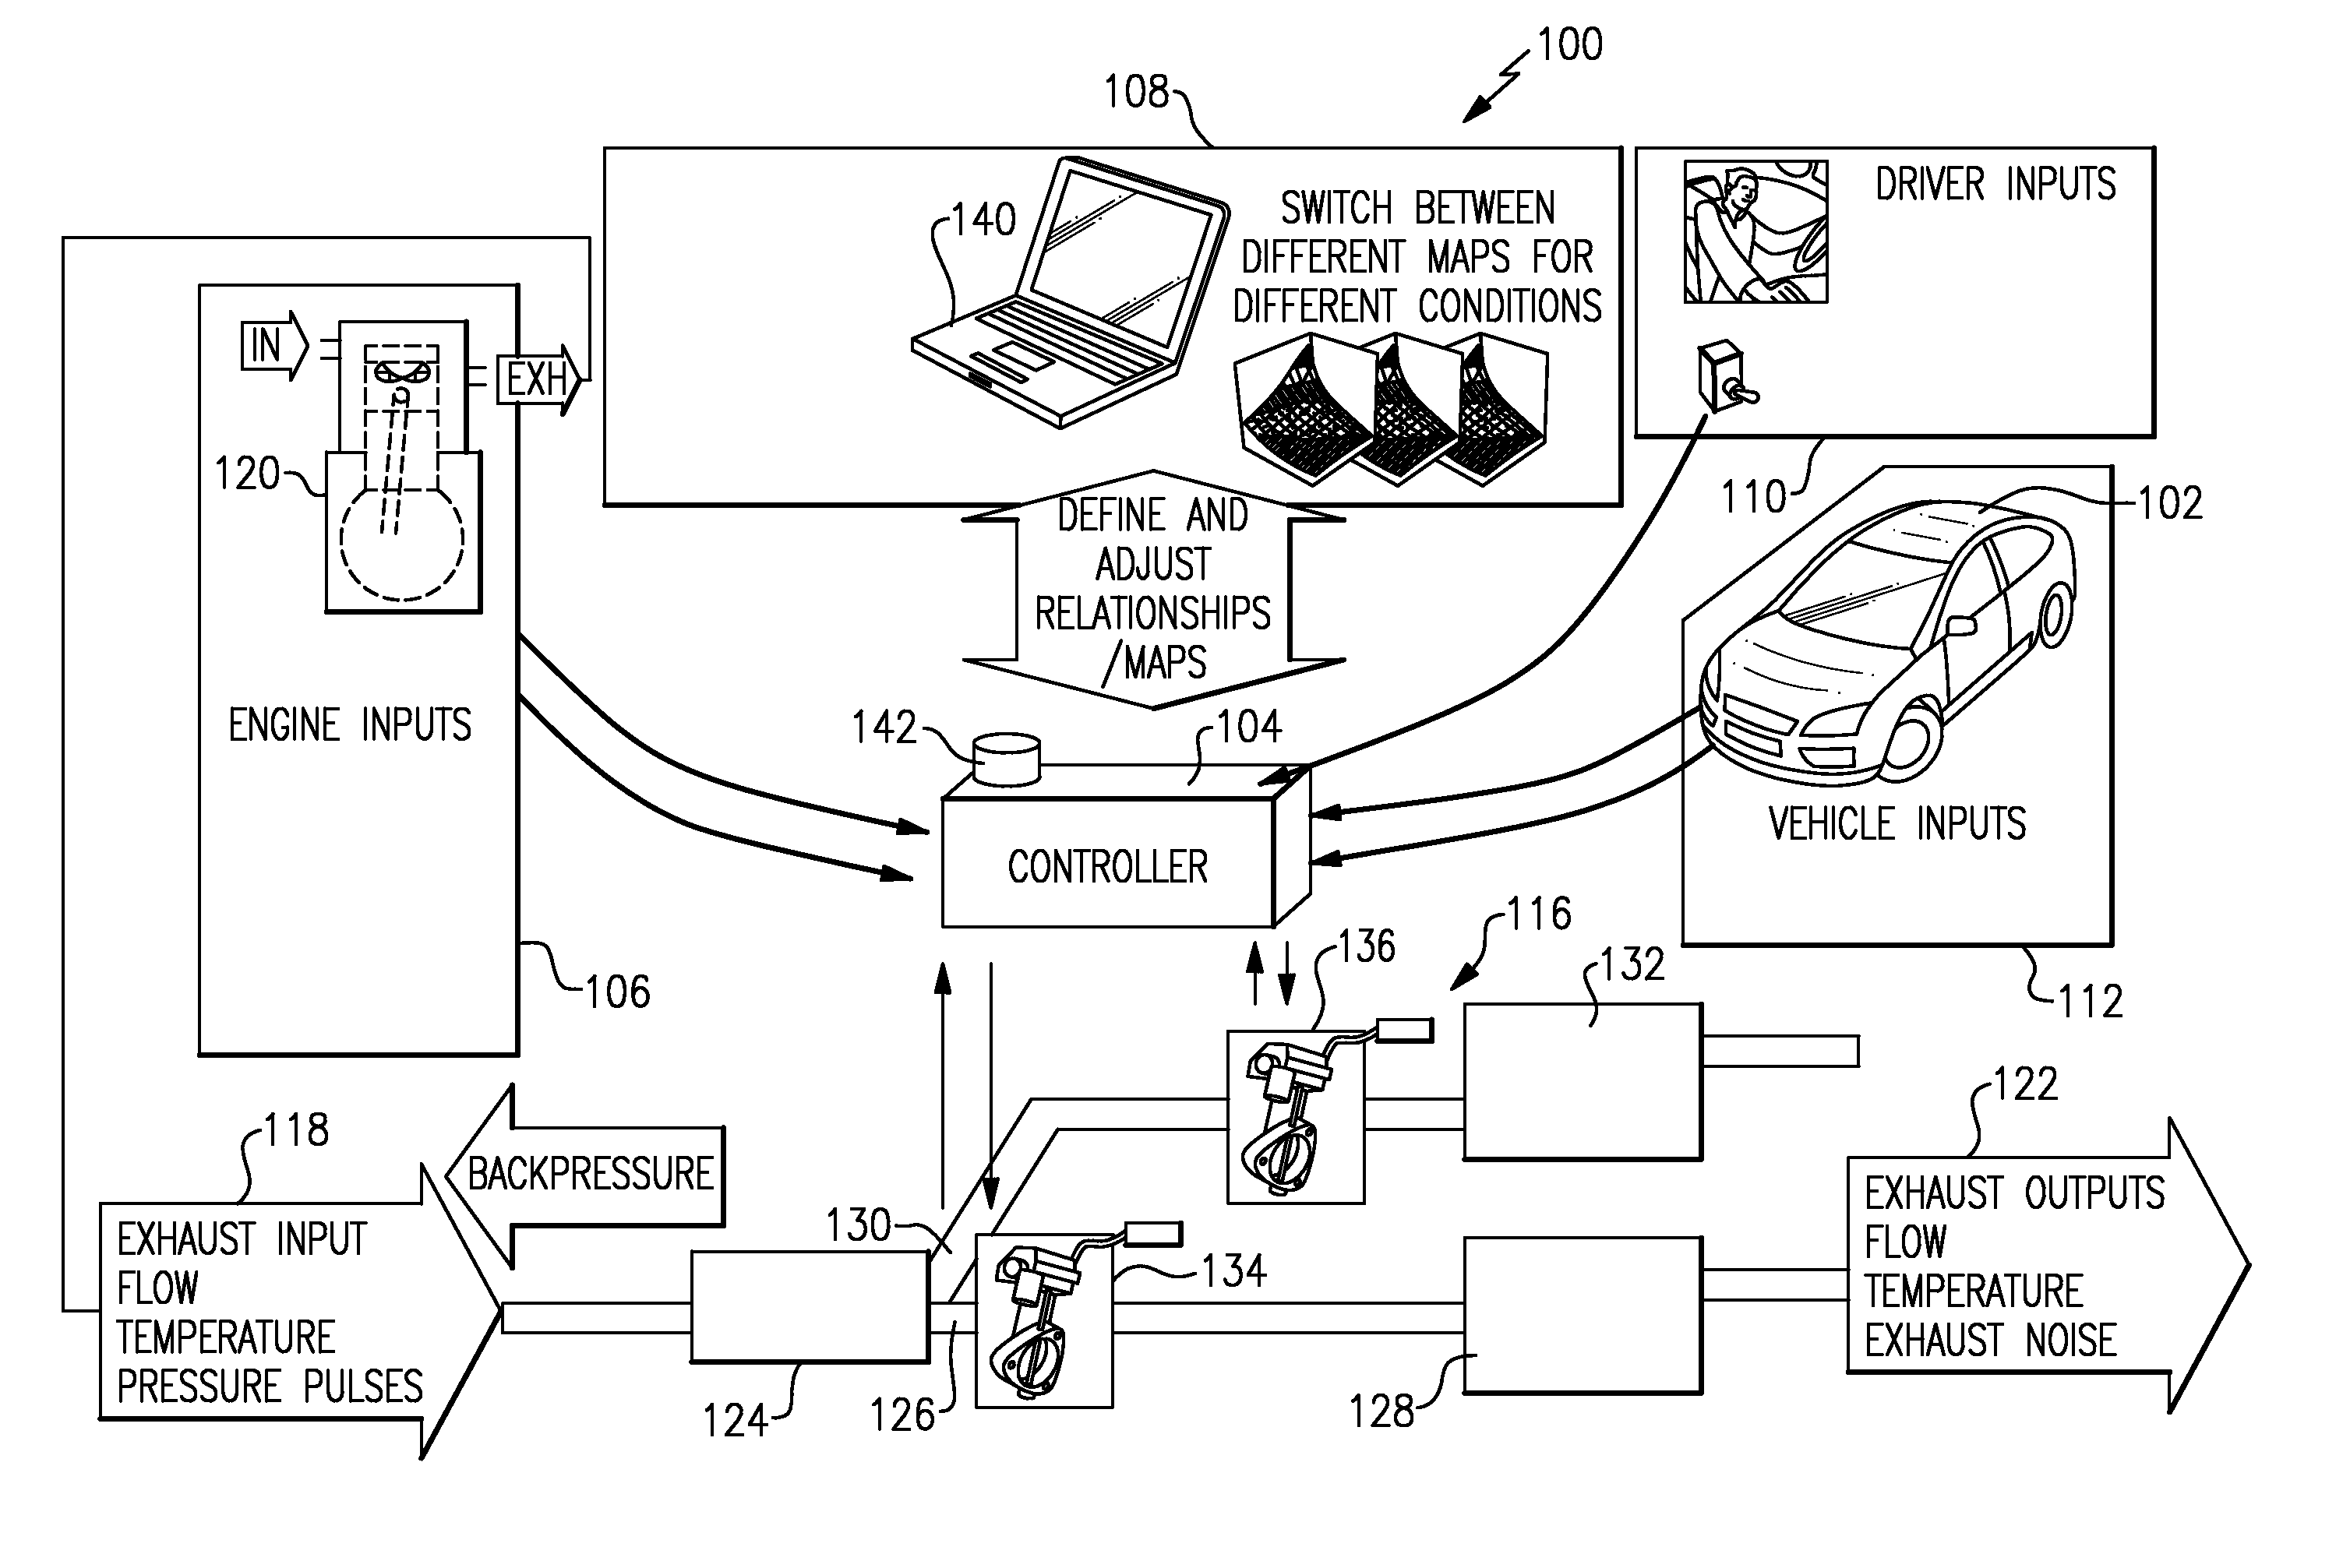 Active exhaust valve control strategy for improved fuel consumption